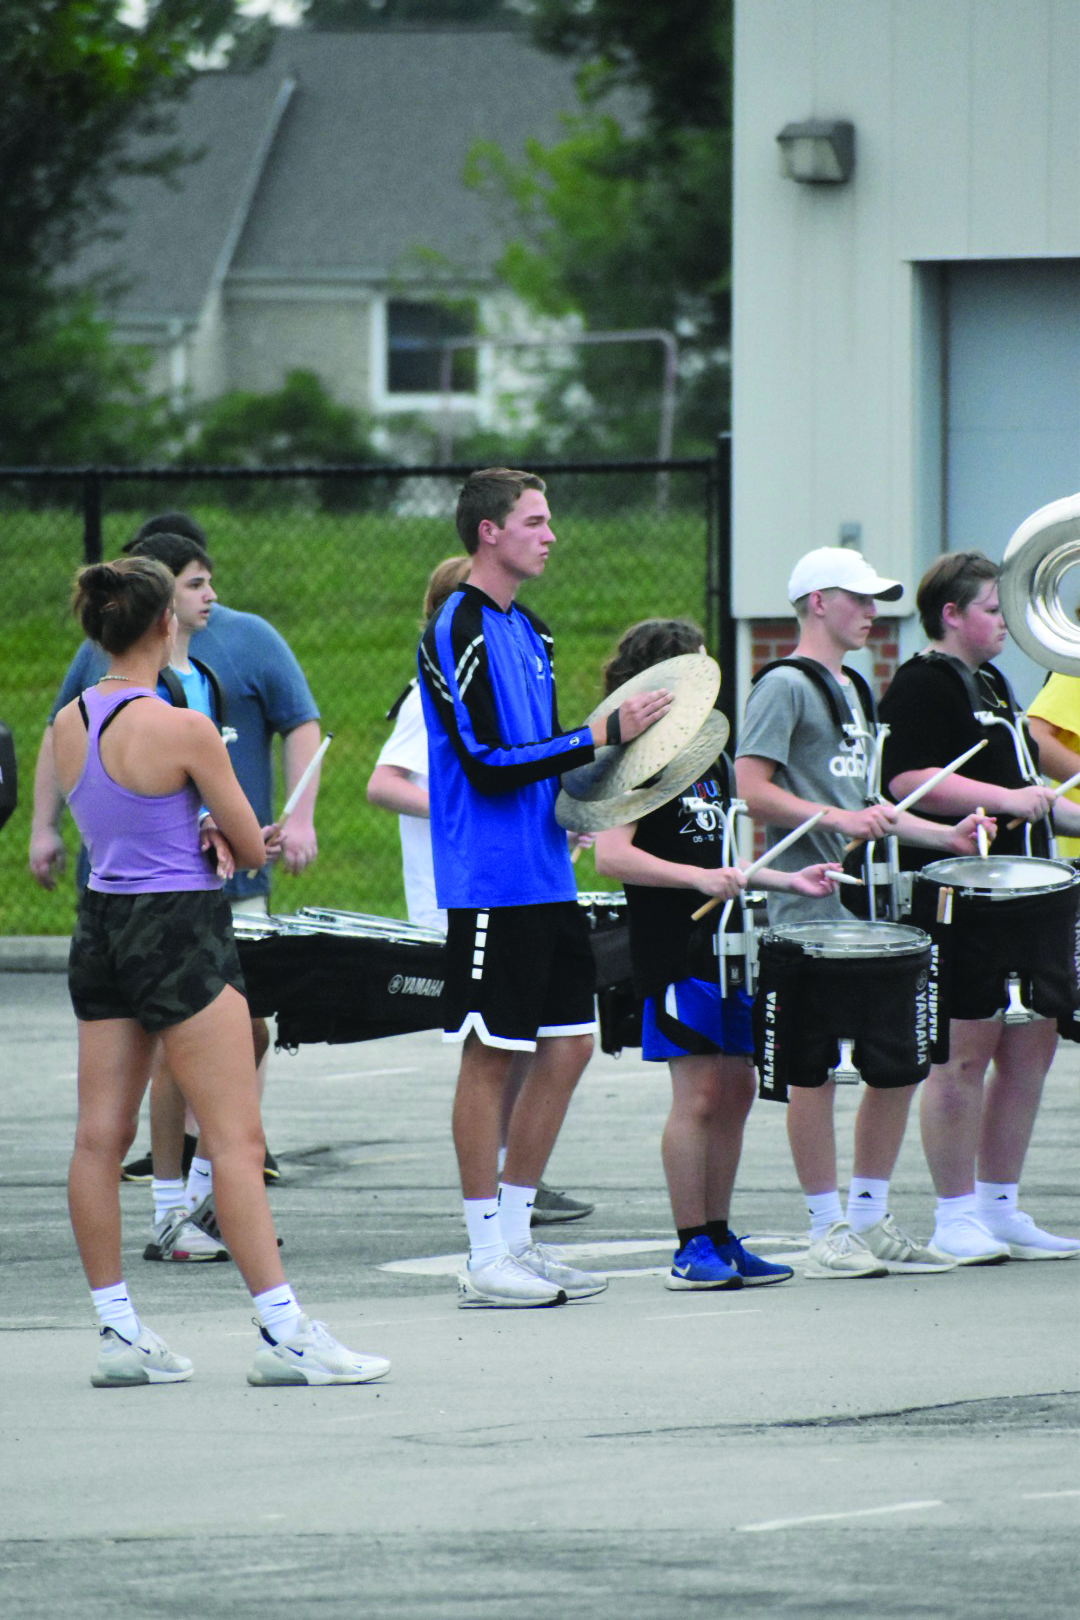 The percussion section of the marching band practices. Hannah Kobza, marching band member and senior, said a typical rehearsal is split into different sections multiple hours long, called blocks. 